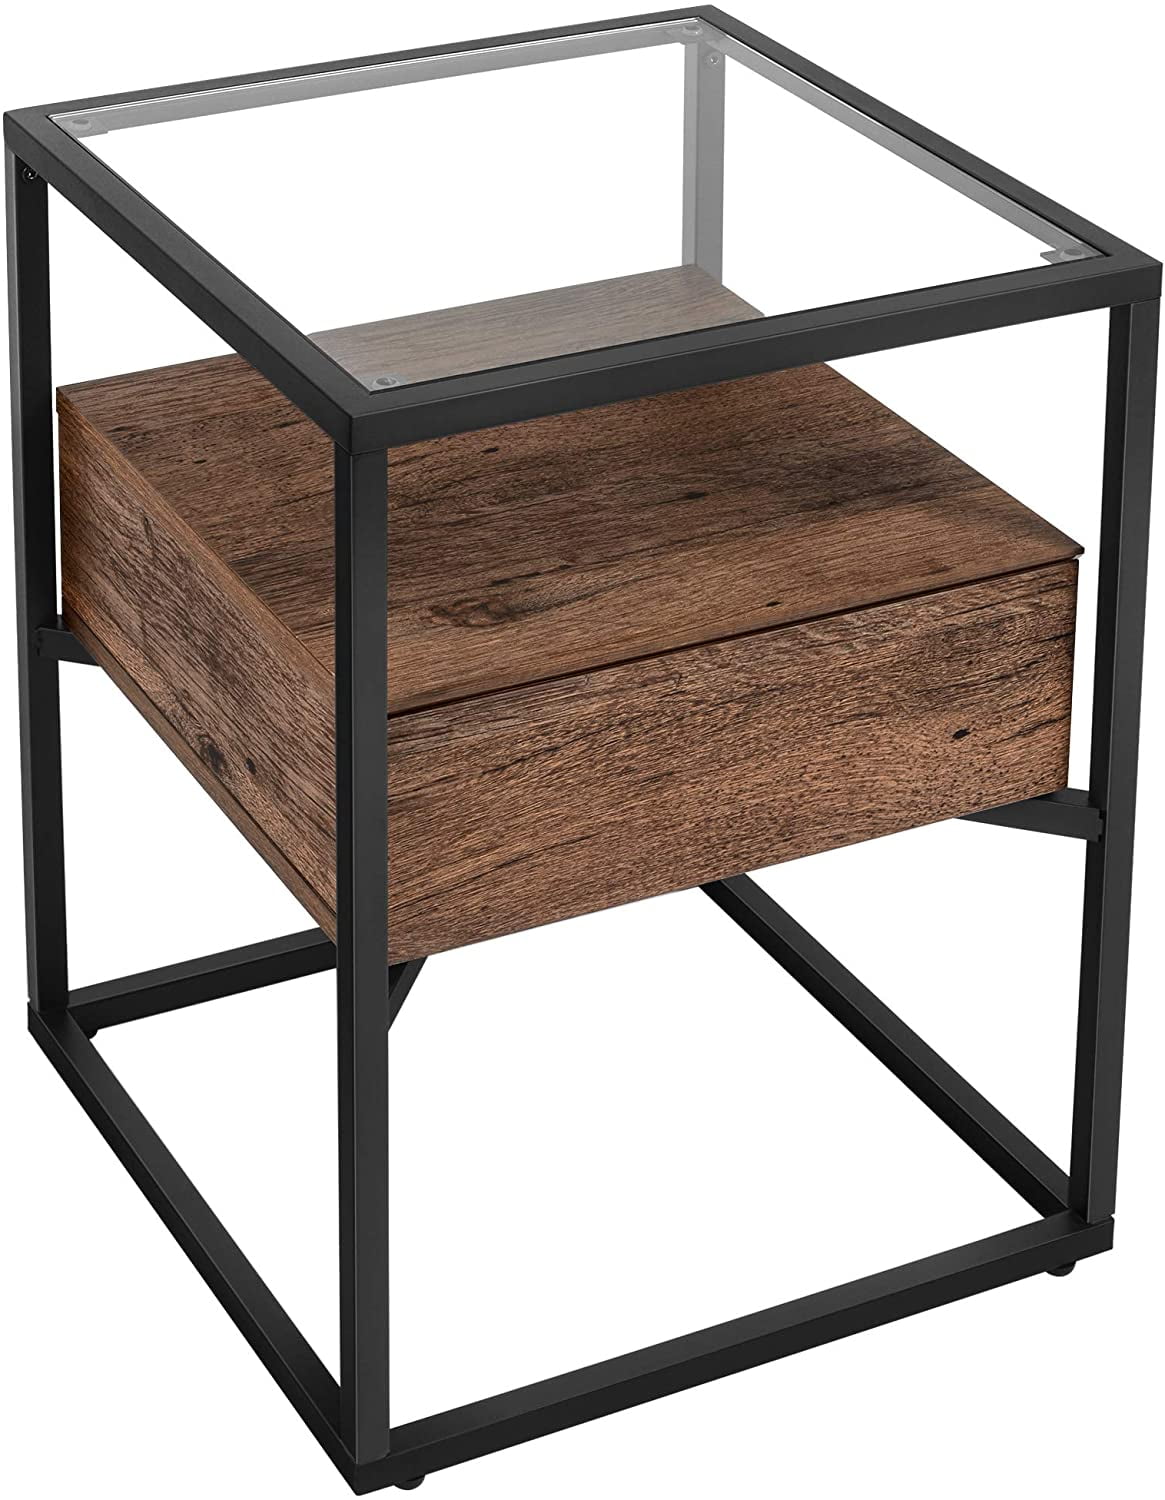 Rustic Brown and Black LET03BX Lounge VASAGLE End Table Stable Steel Frame Tempered Glass Side Table Nightstand with Storage Shelf Accent Furniture in Living Room Industrial